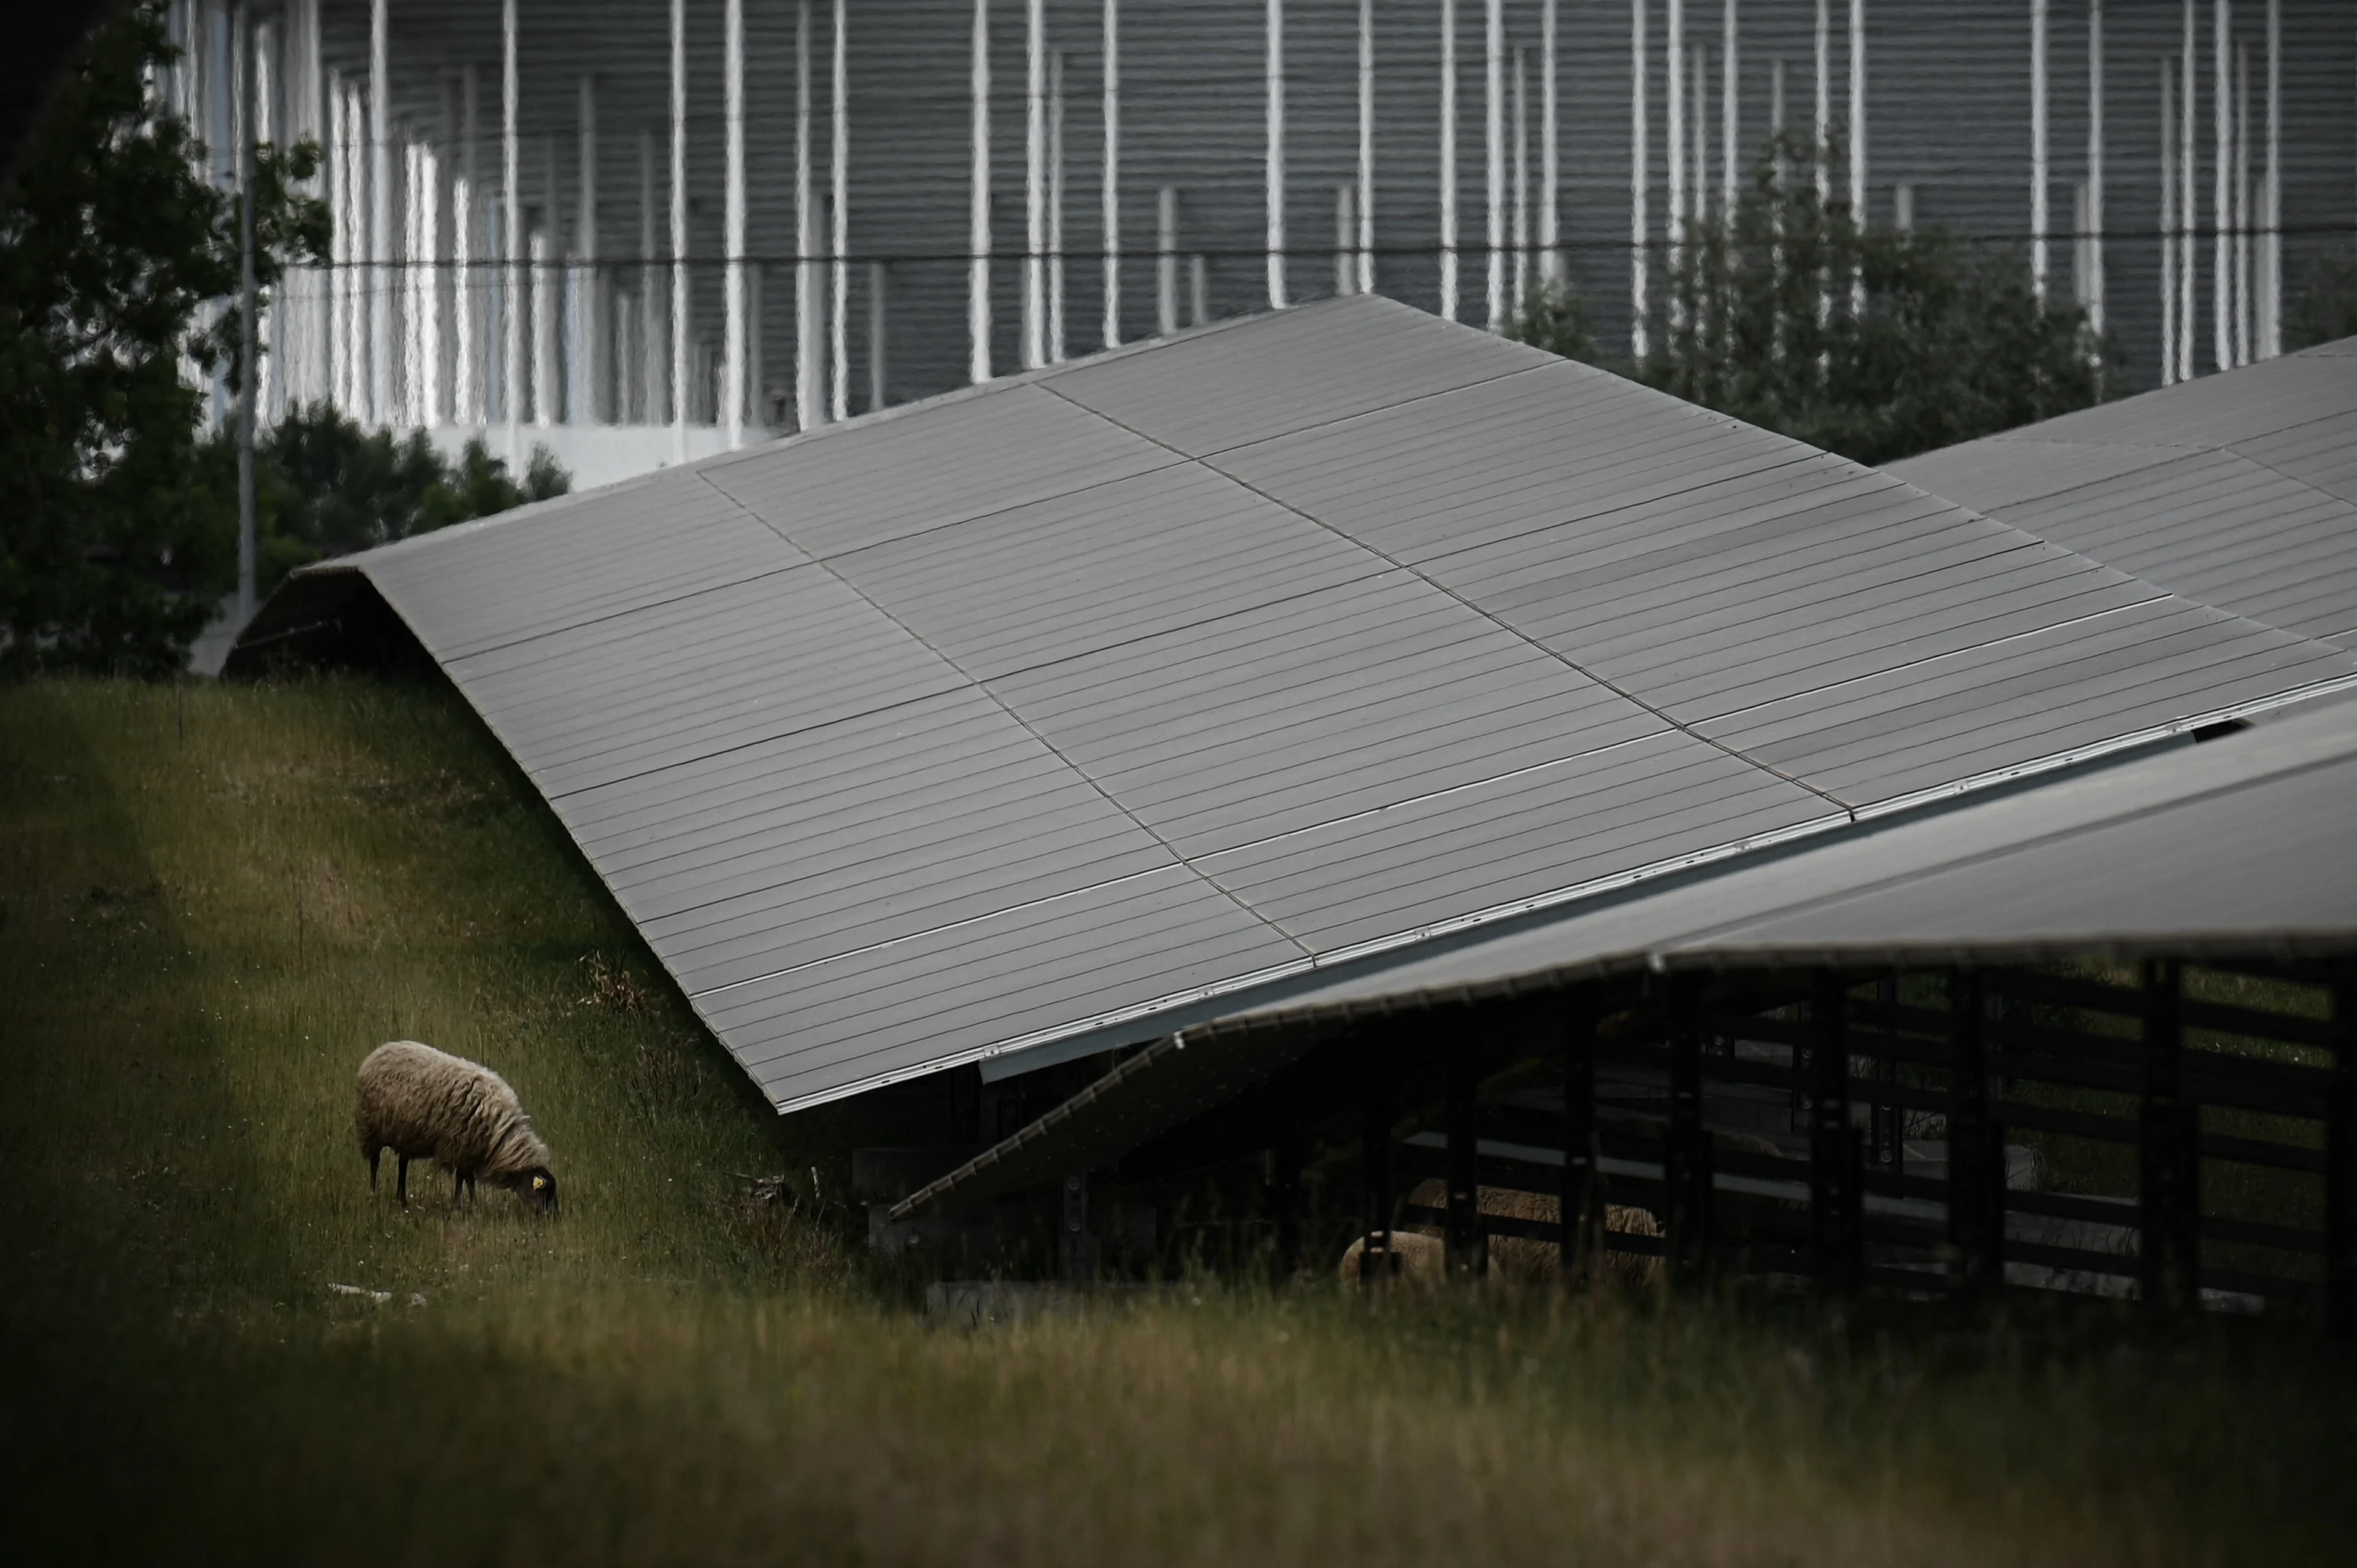 A sheep grazes next to solar panels of the Labarde solar farm in Bordeaux southwestern France on May 12, 2022. The solar farm of 140,000 solar panels is located on a former landfill and is the largest urban solar farm in Europe. (Philippe LOPEZ/ AFP/ Getty Images)